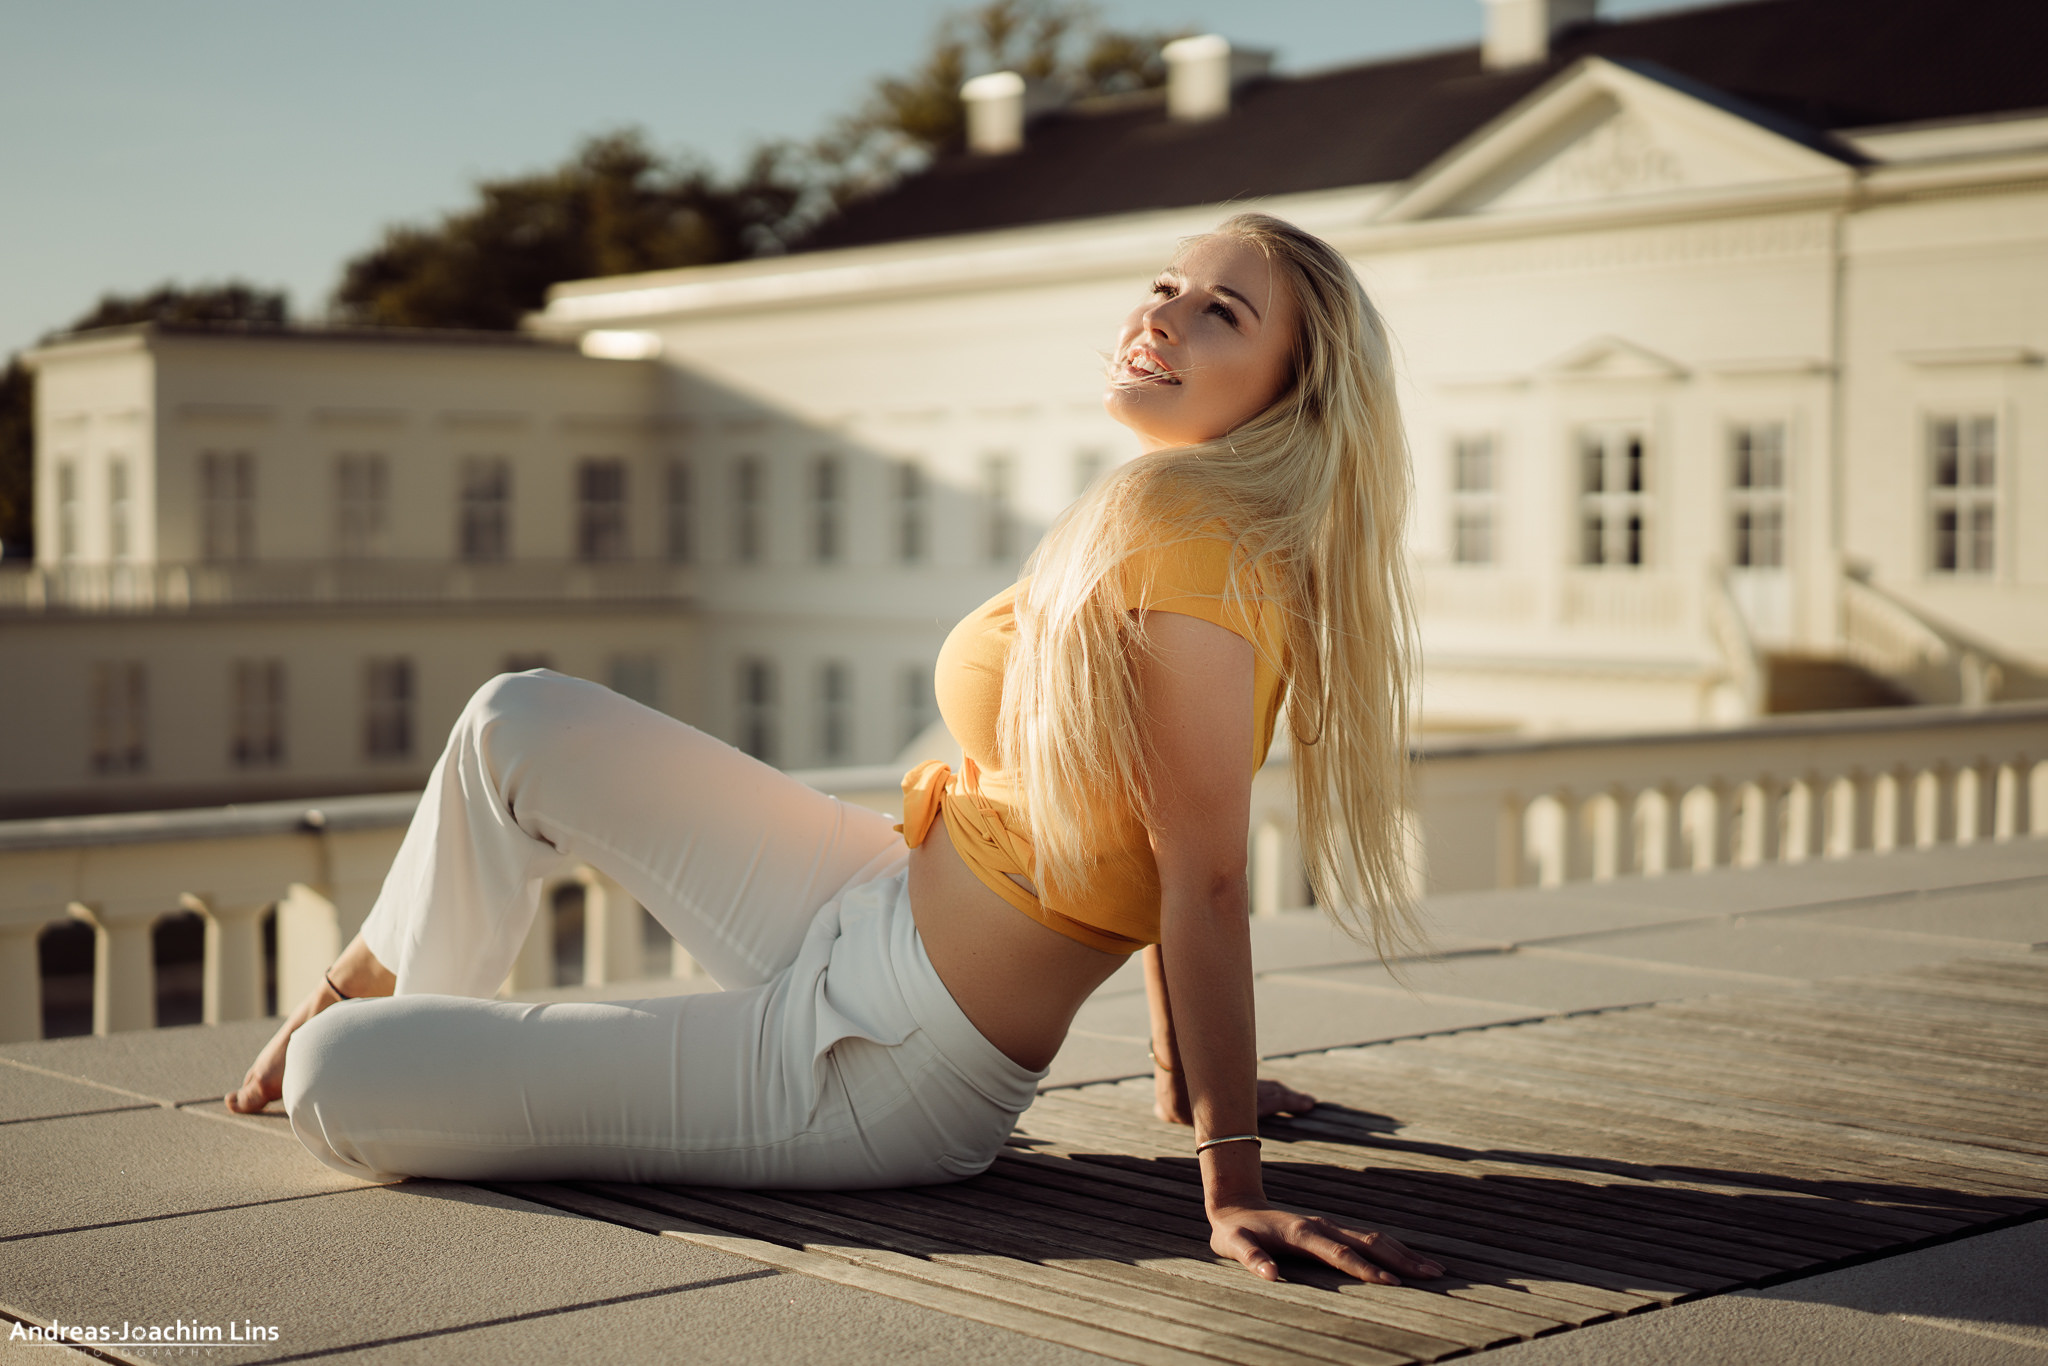 Andreas Joachim Lins Women Model Portrait Outdoors Crop Top Sitting Blonde Smiling Looking Into The  2048x1366